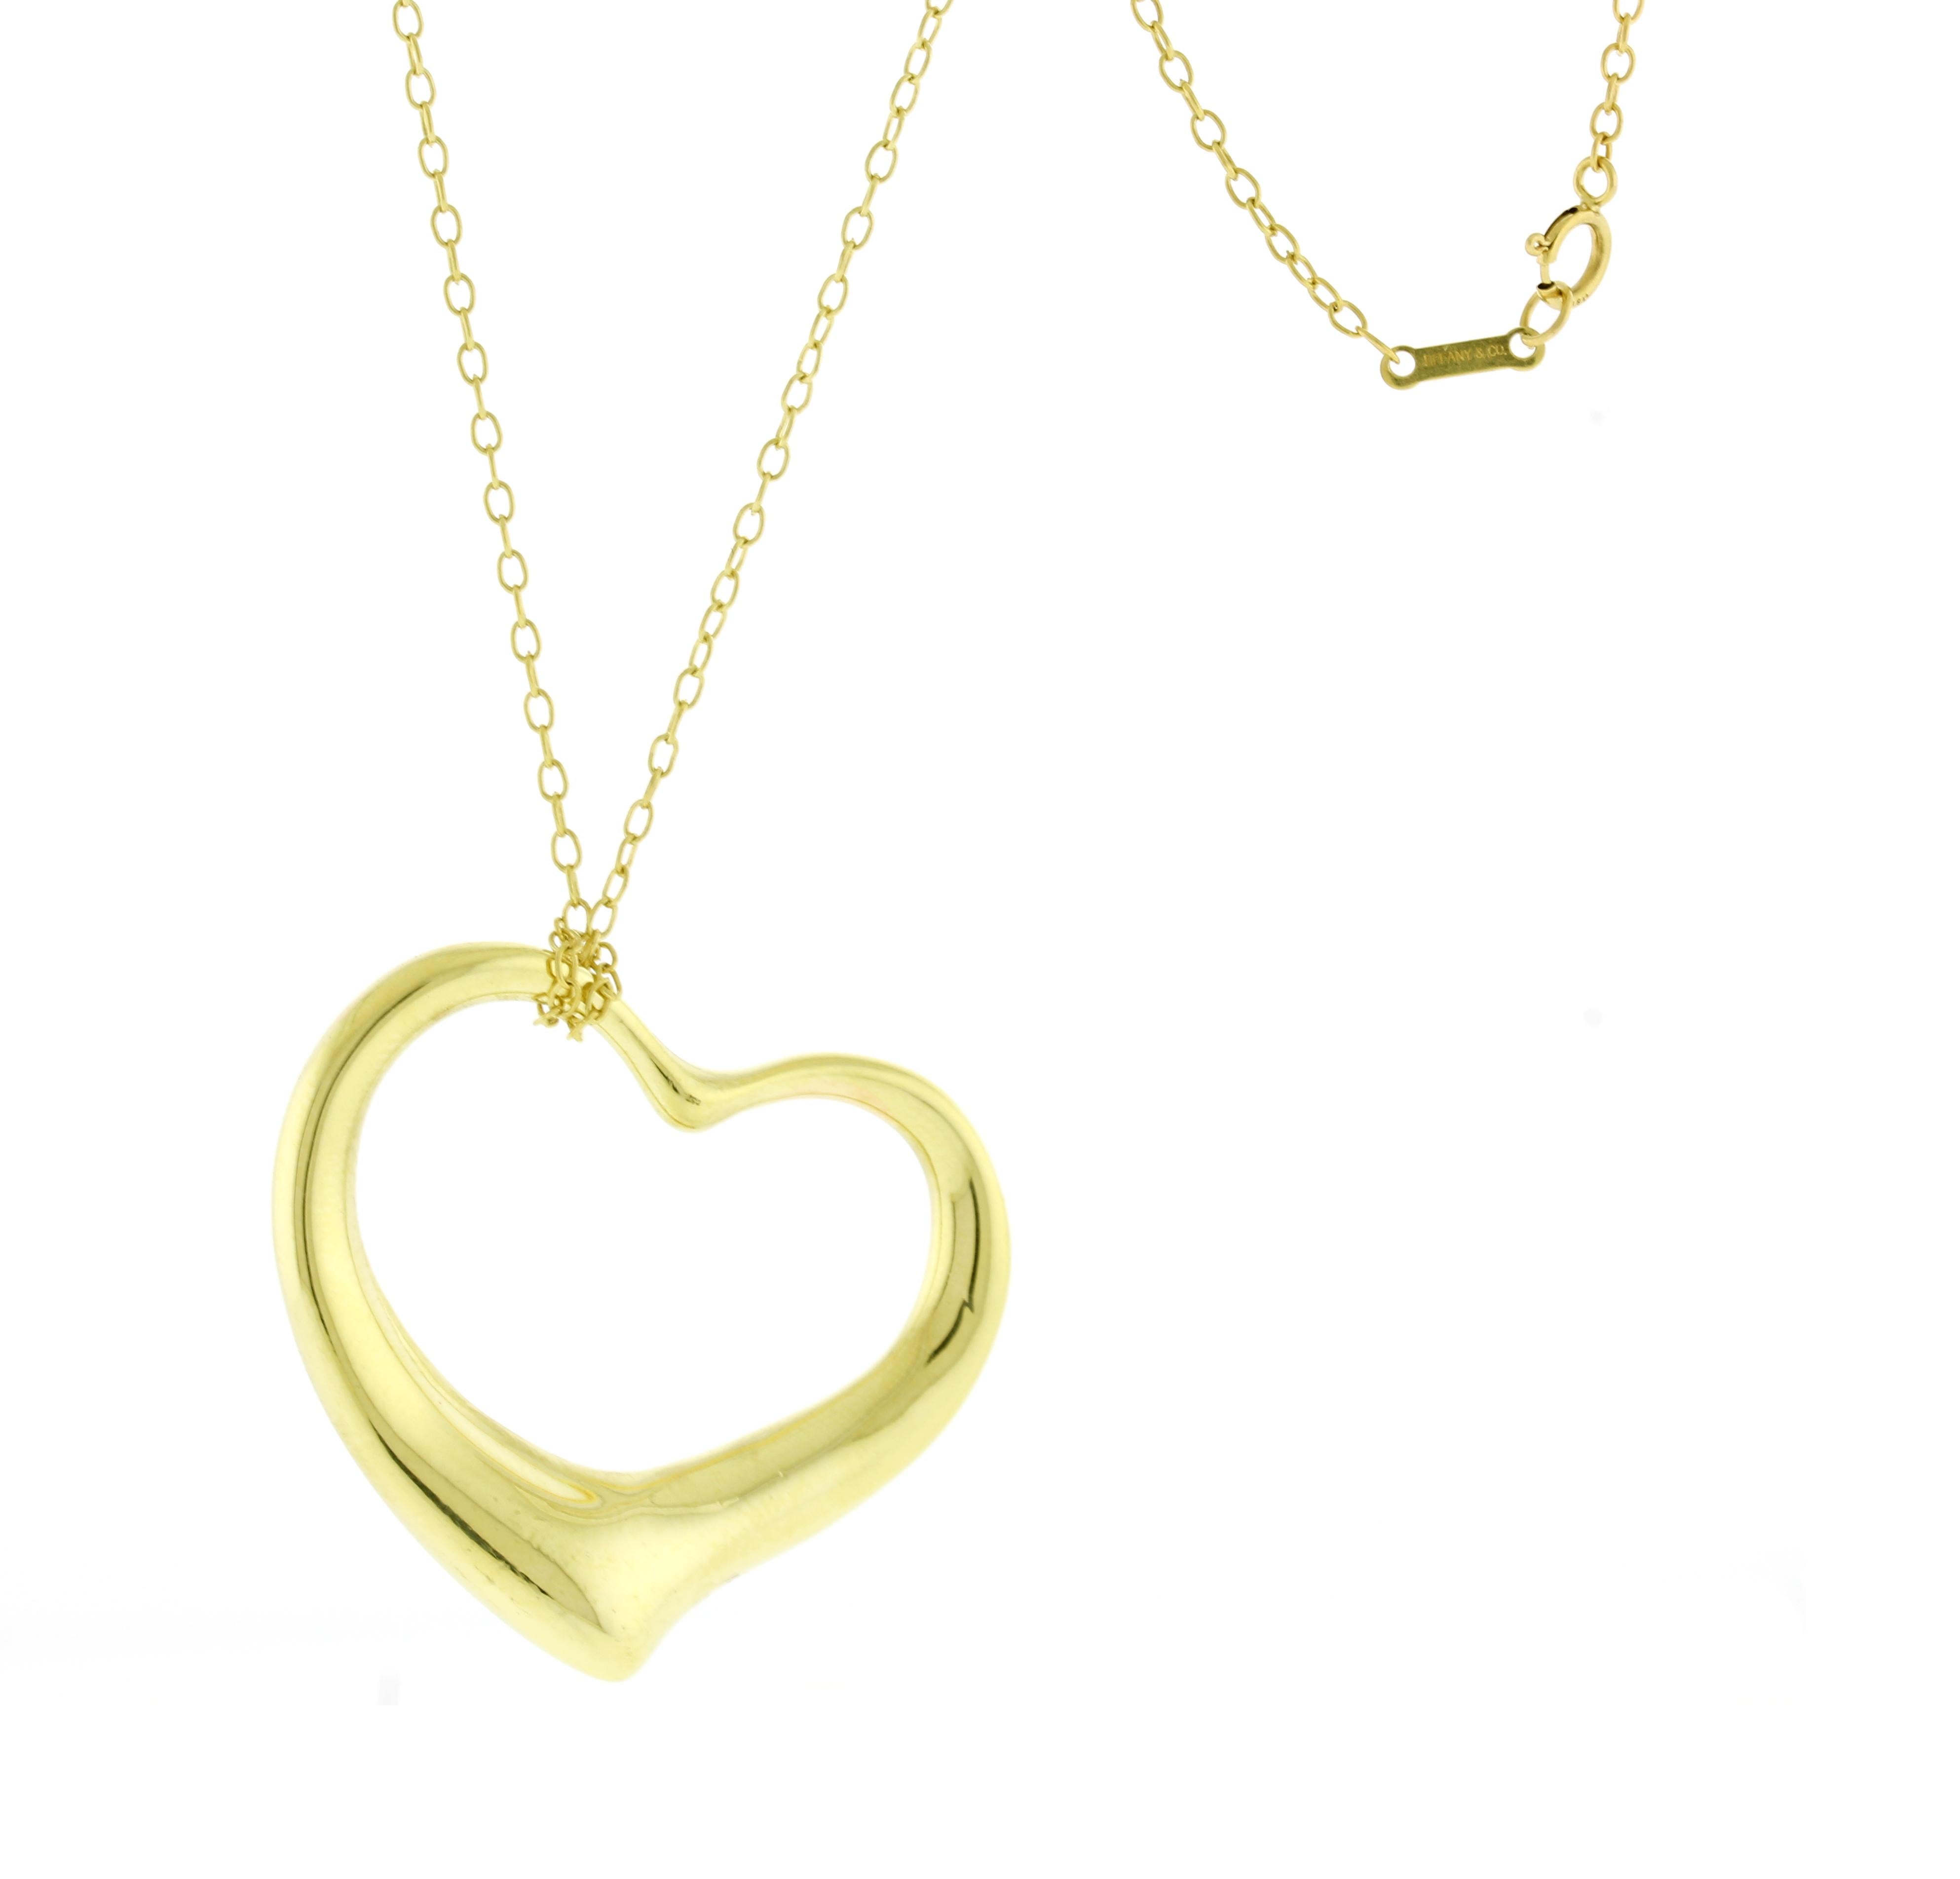 Tiffany & Co. Elsa Peretti Large Open Heart Gold Necklace In Excellent Condition For Sale In Bethesda, MD